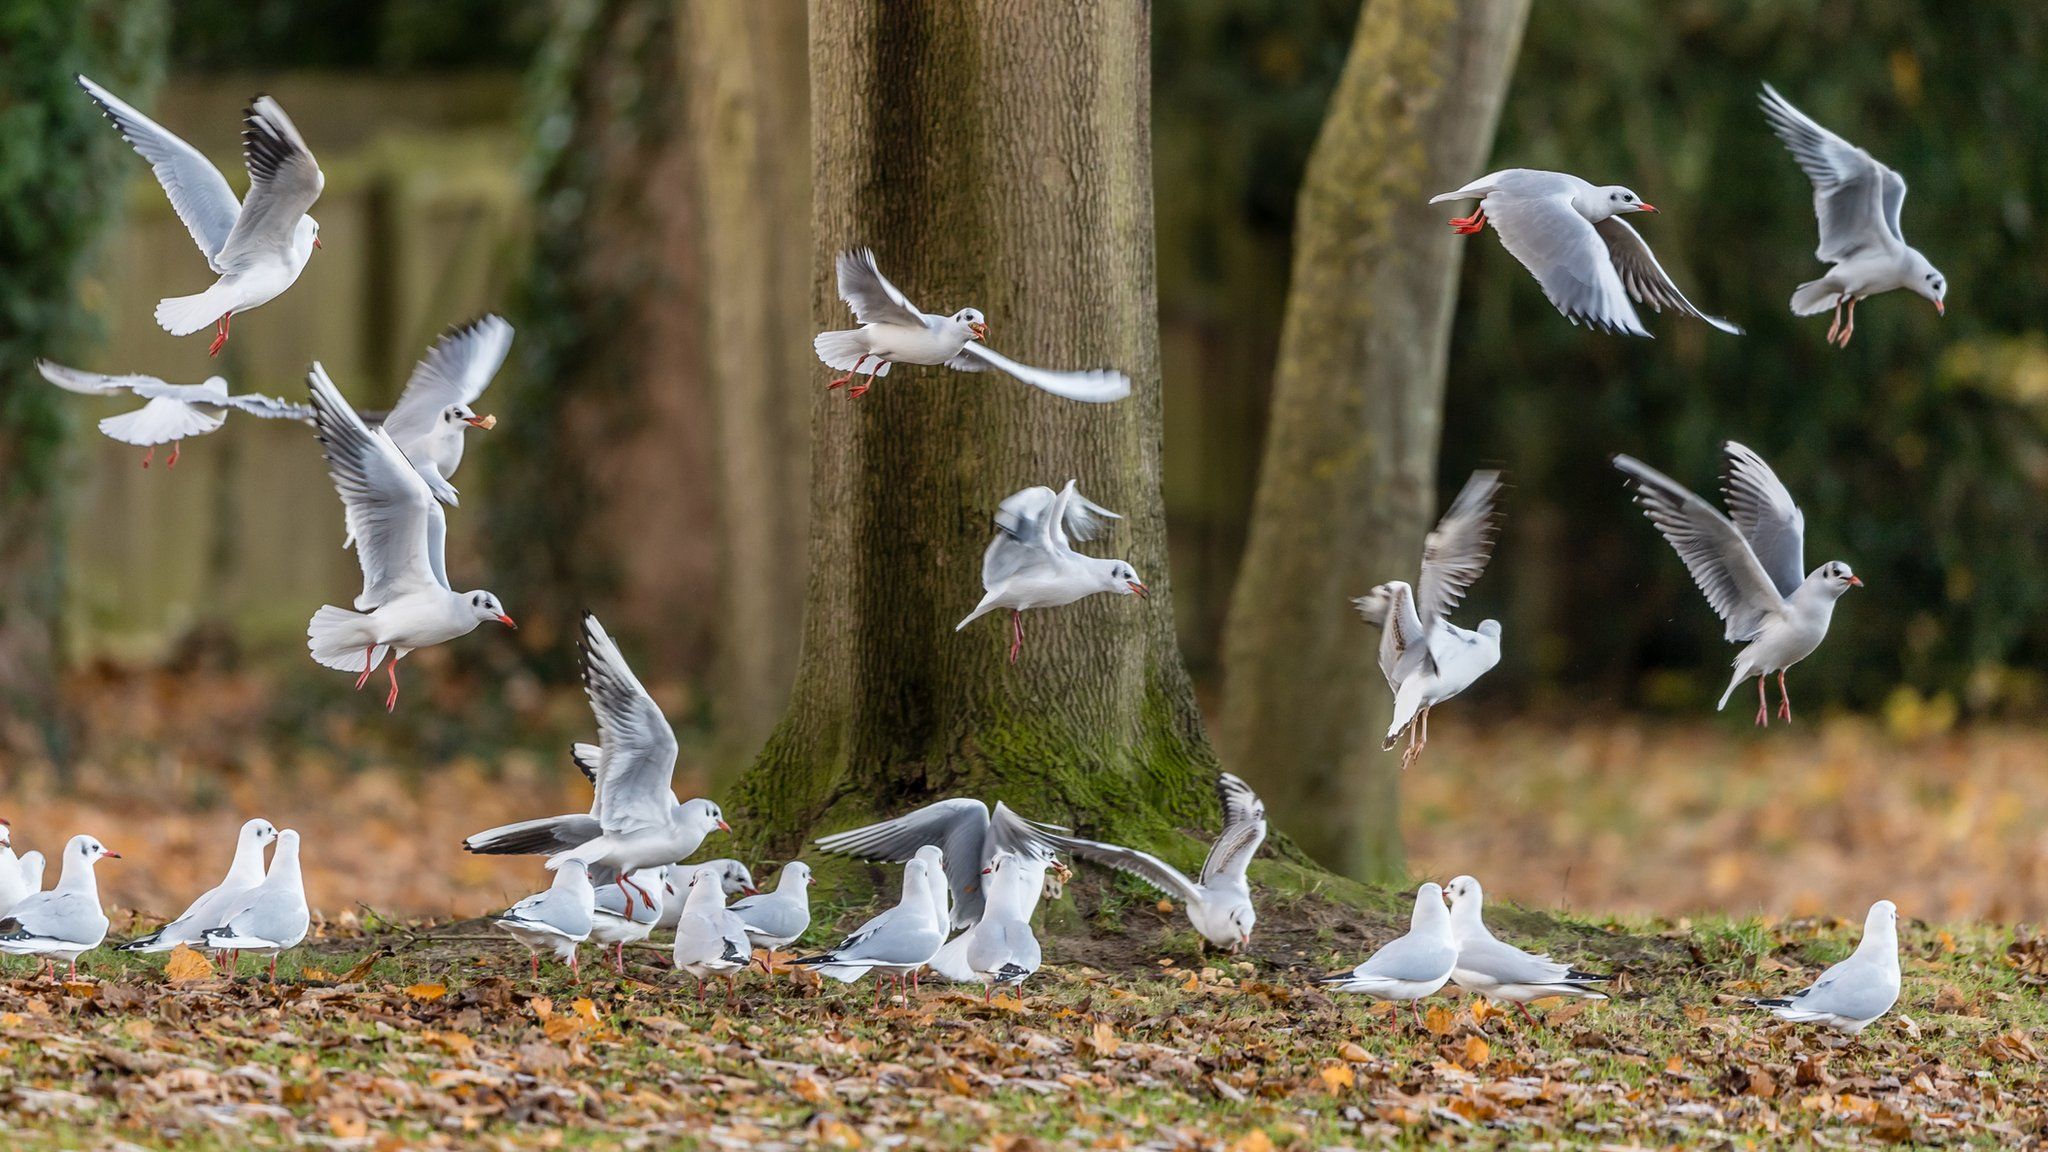 Black Headed Gull gather for feeding by local residents at South Parks